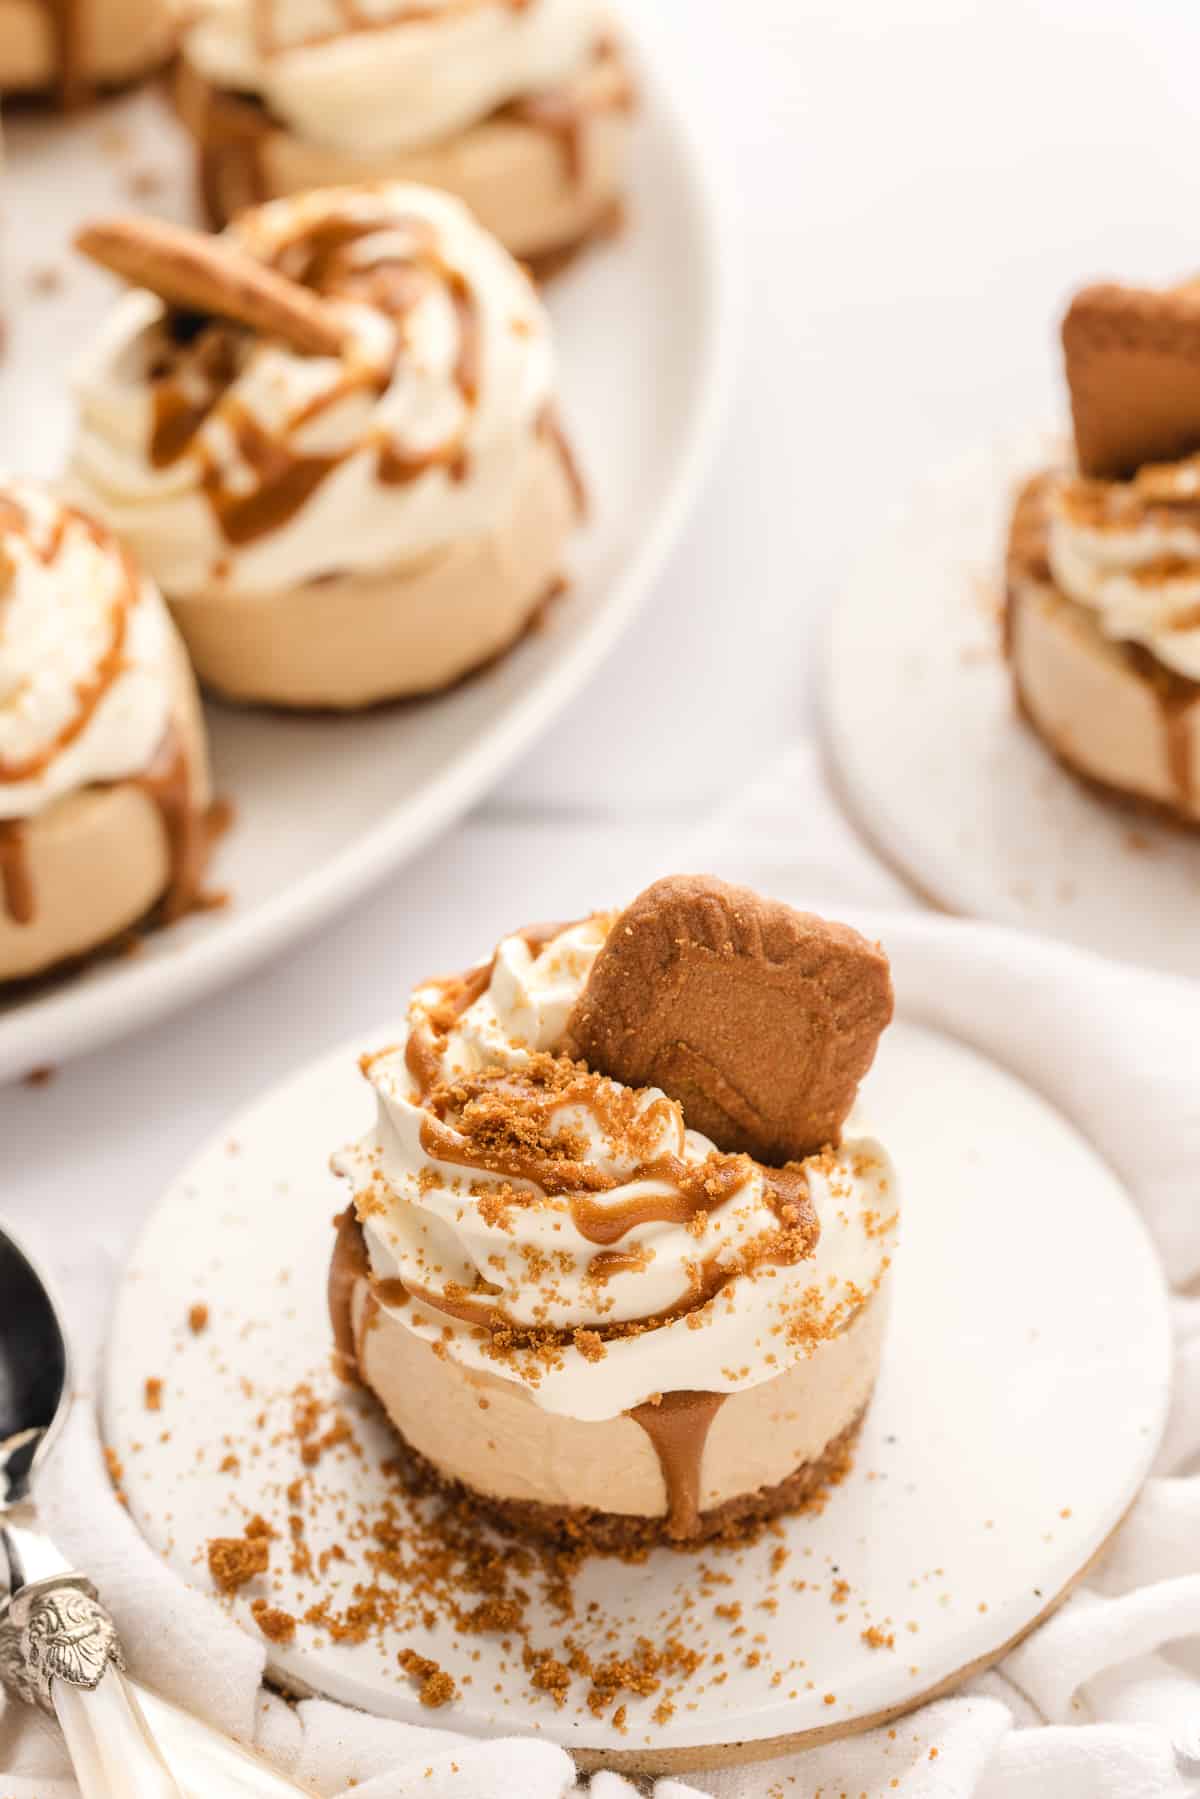 Mini Biscoff Cheesecakes on white plates with a serving try of more cheesecake in the background.